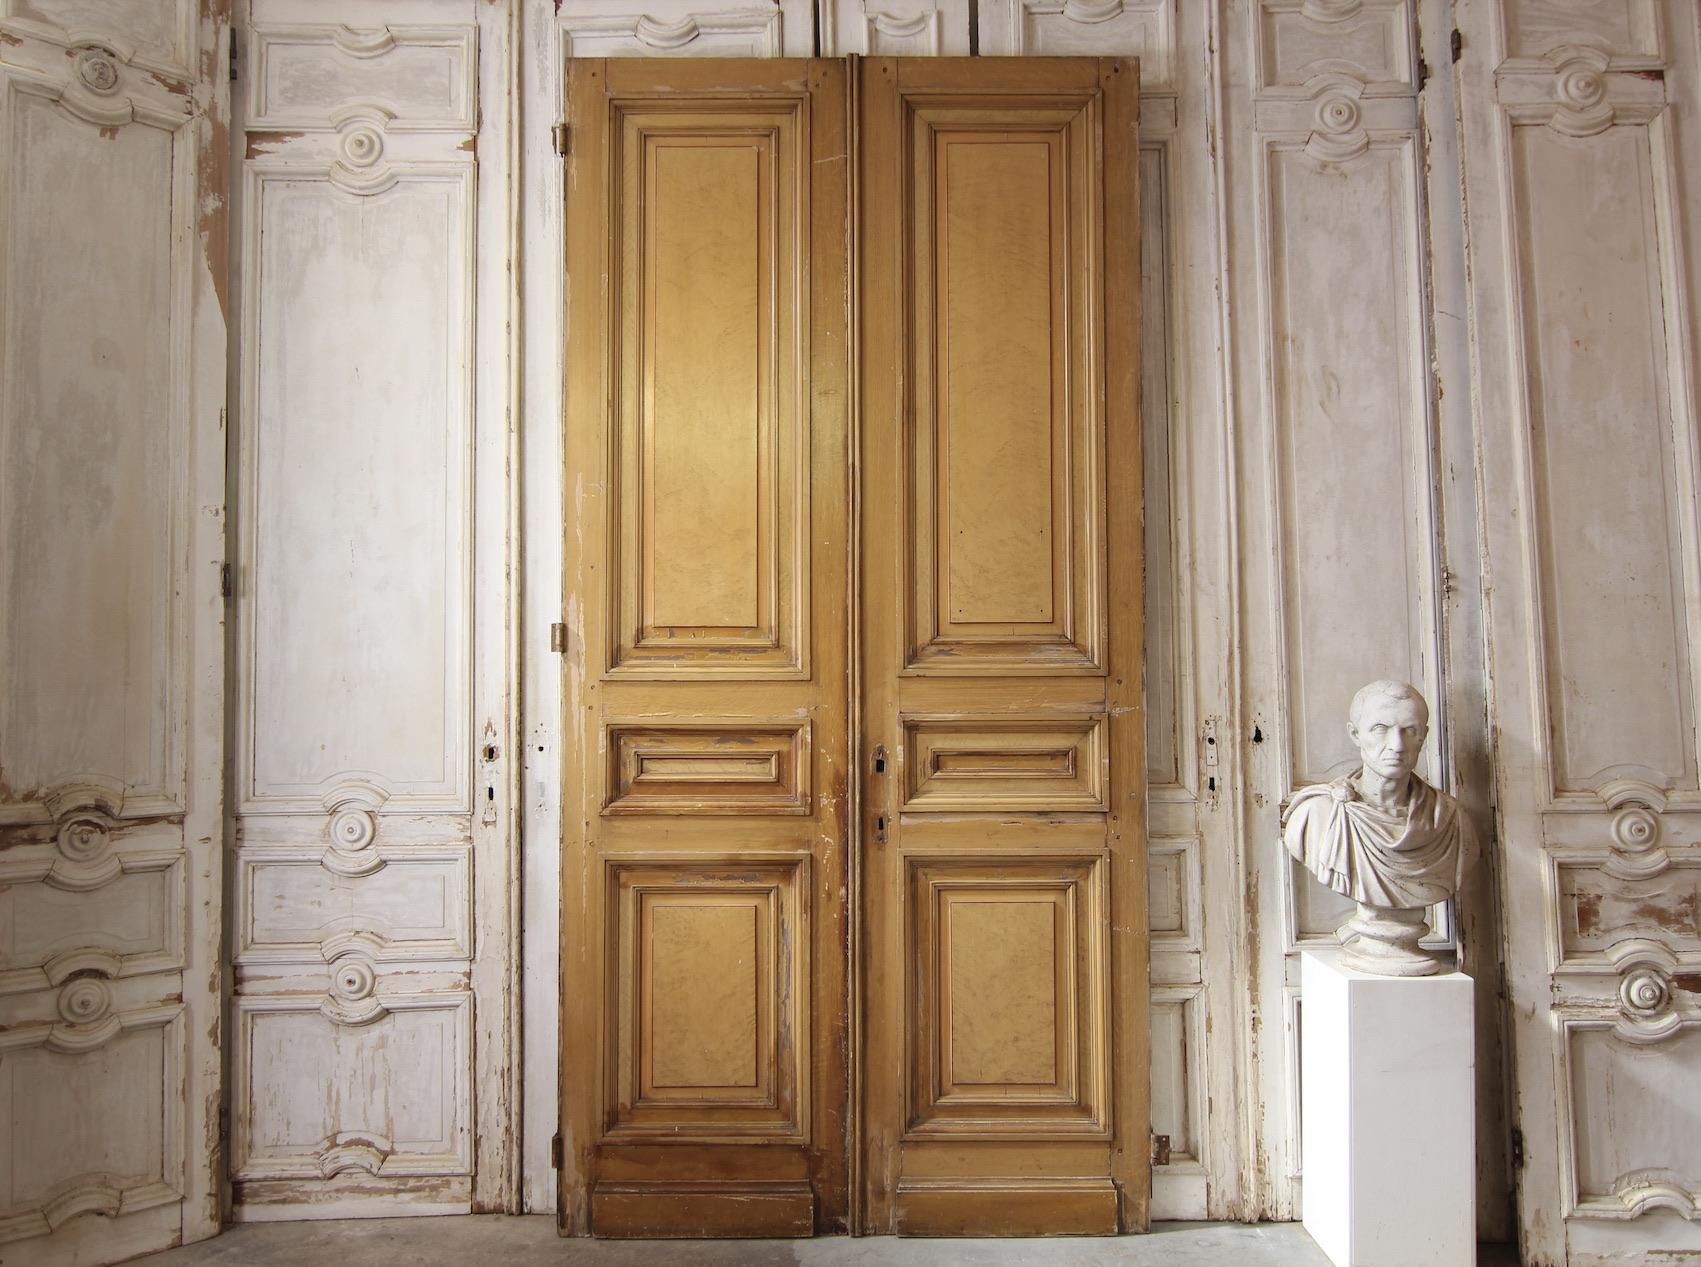 High double door in the original paint from around 1900.

Solid pine frame construction with 3 cassettes each.

Dimensions: 
304 cm high / 119.7 inch high,
75 cm or 150 cm wide / 29.5 inch or 59 inch wide,
8 cm deep / 3 inch deep.